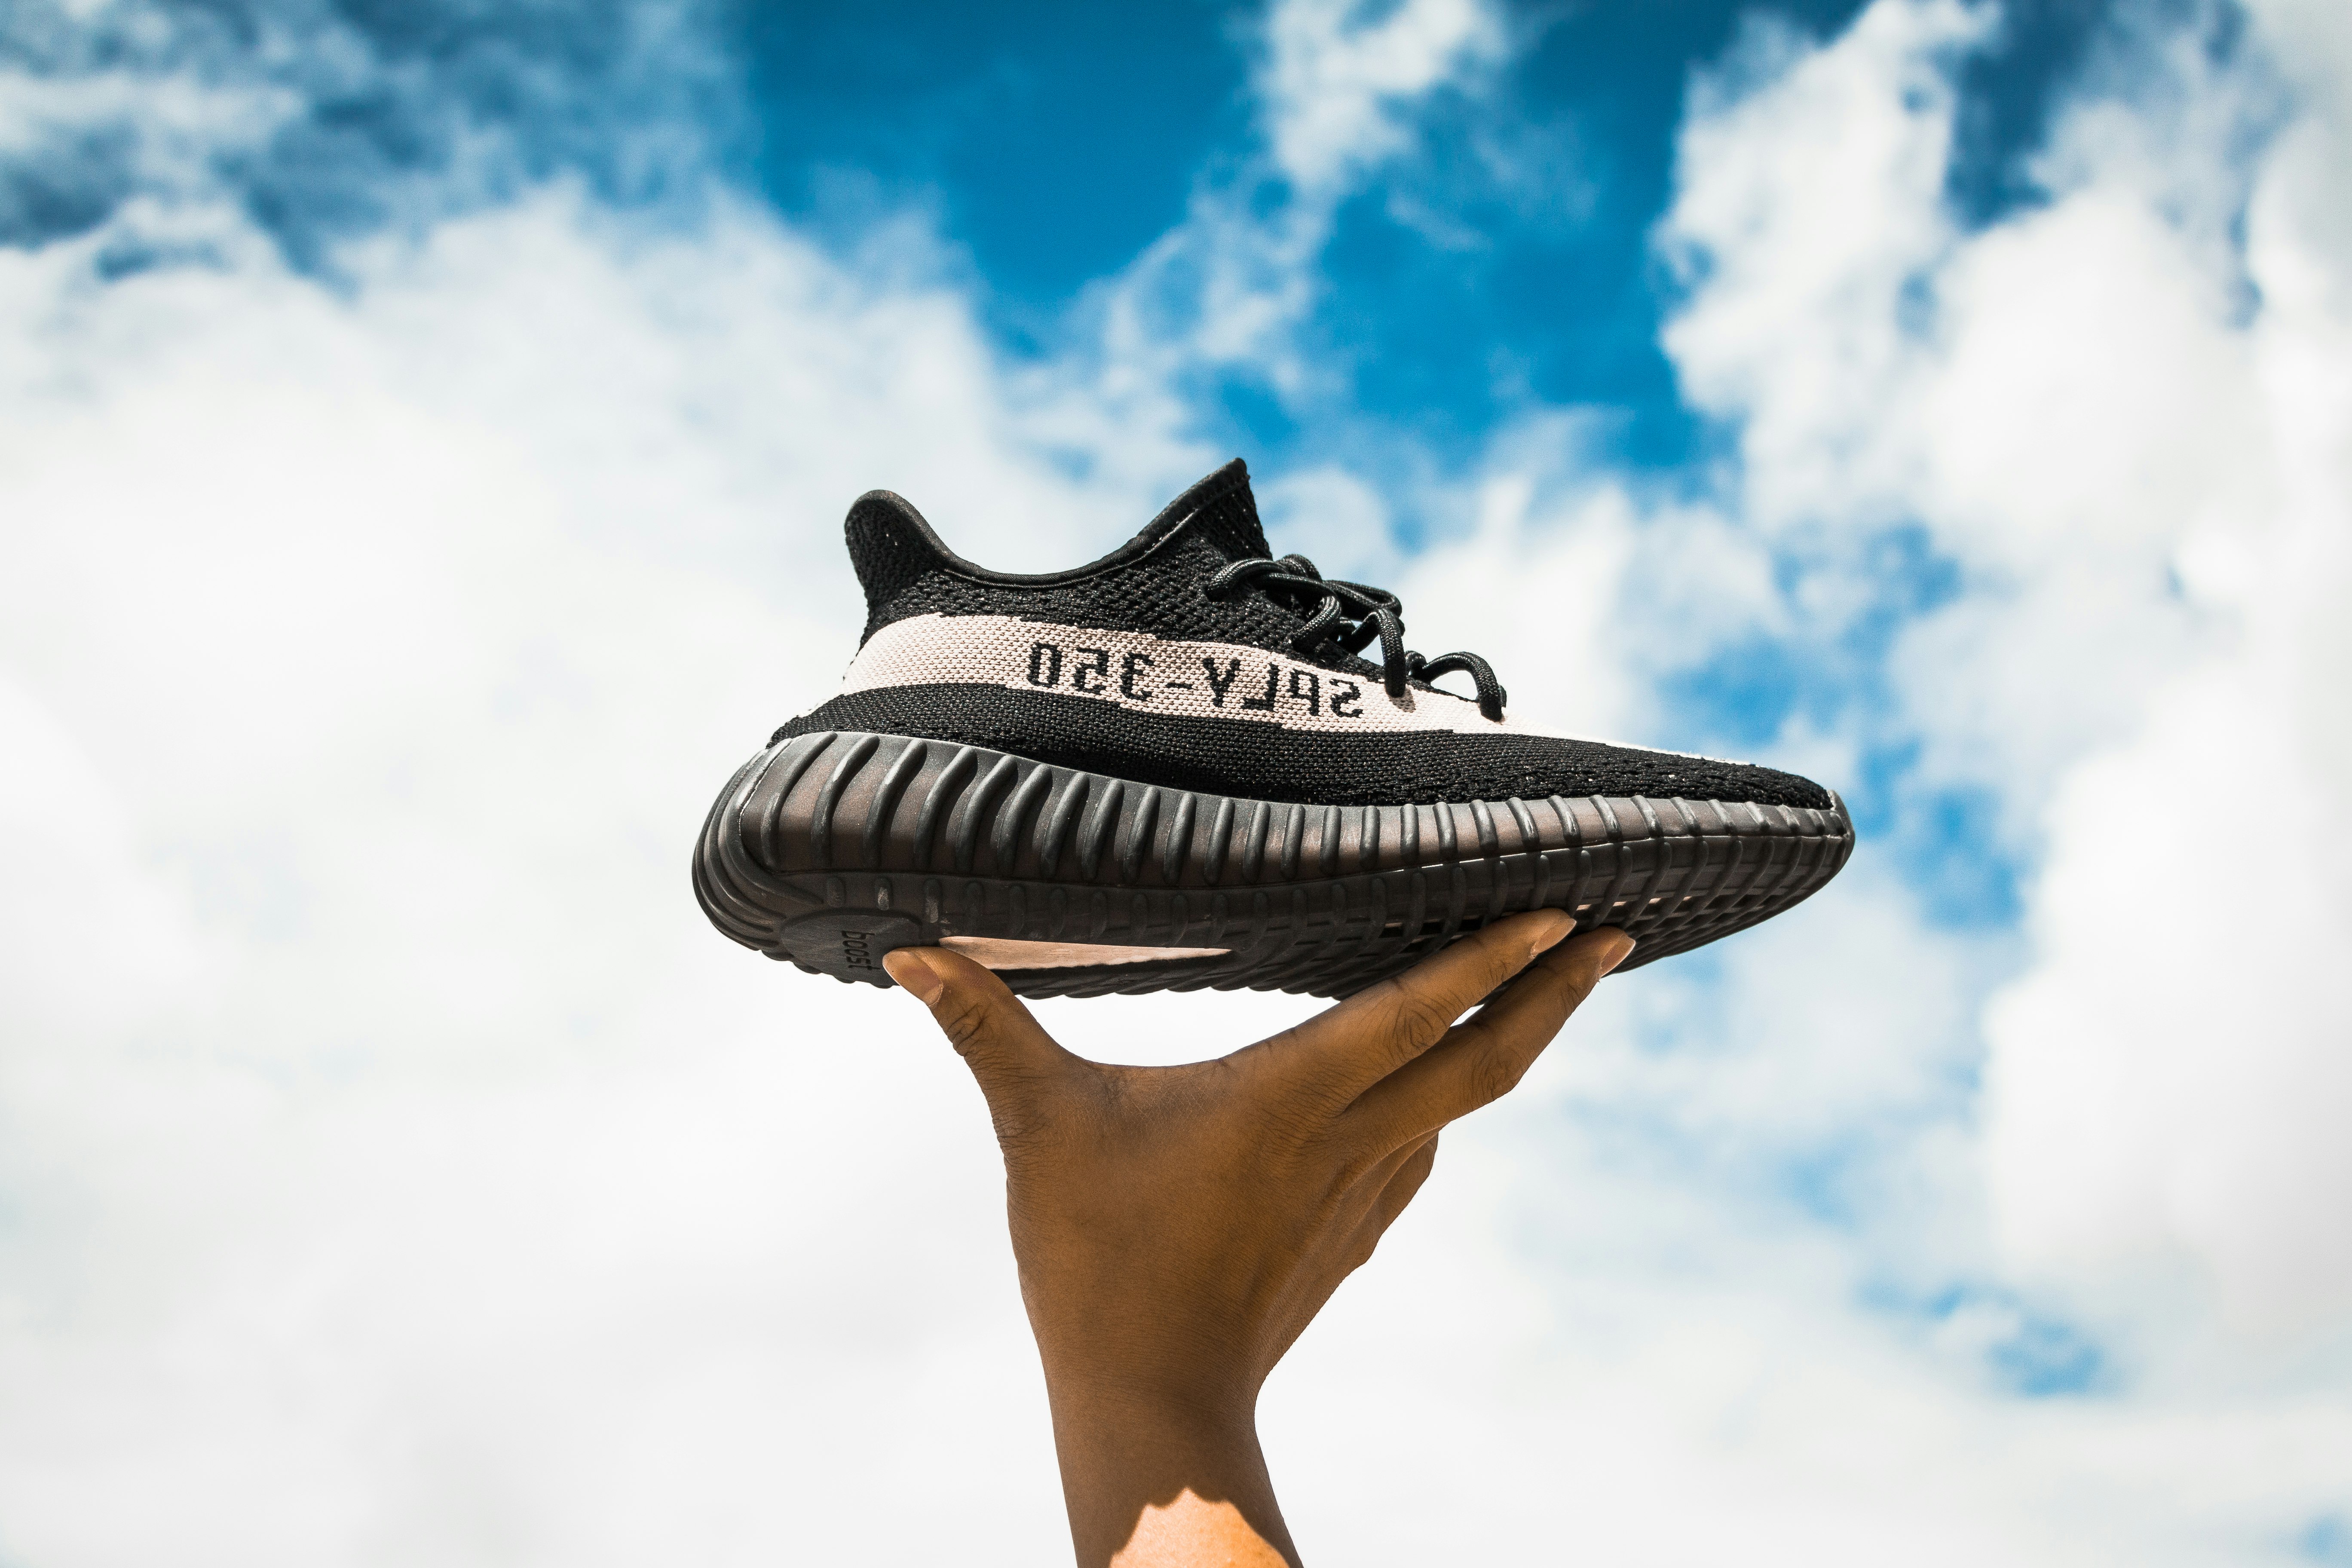 unpaired adidas Yeezy Boost 350 V2 shoe on person's hand